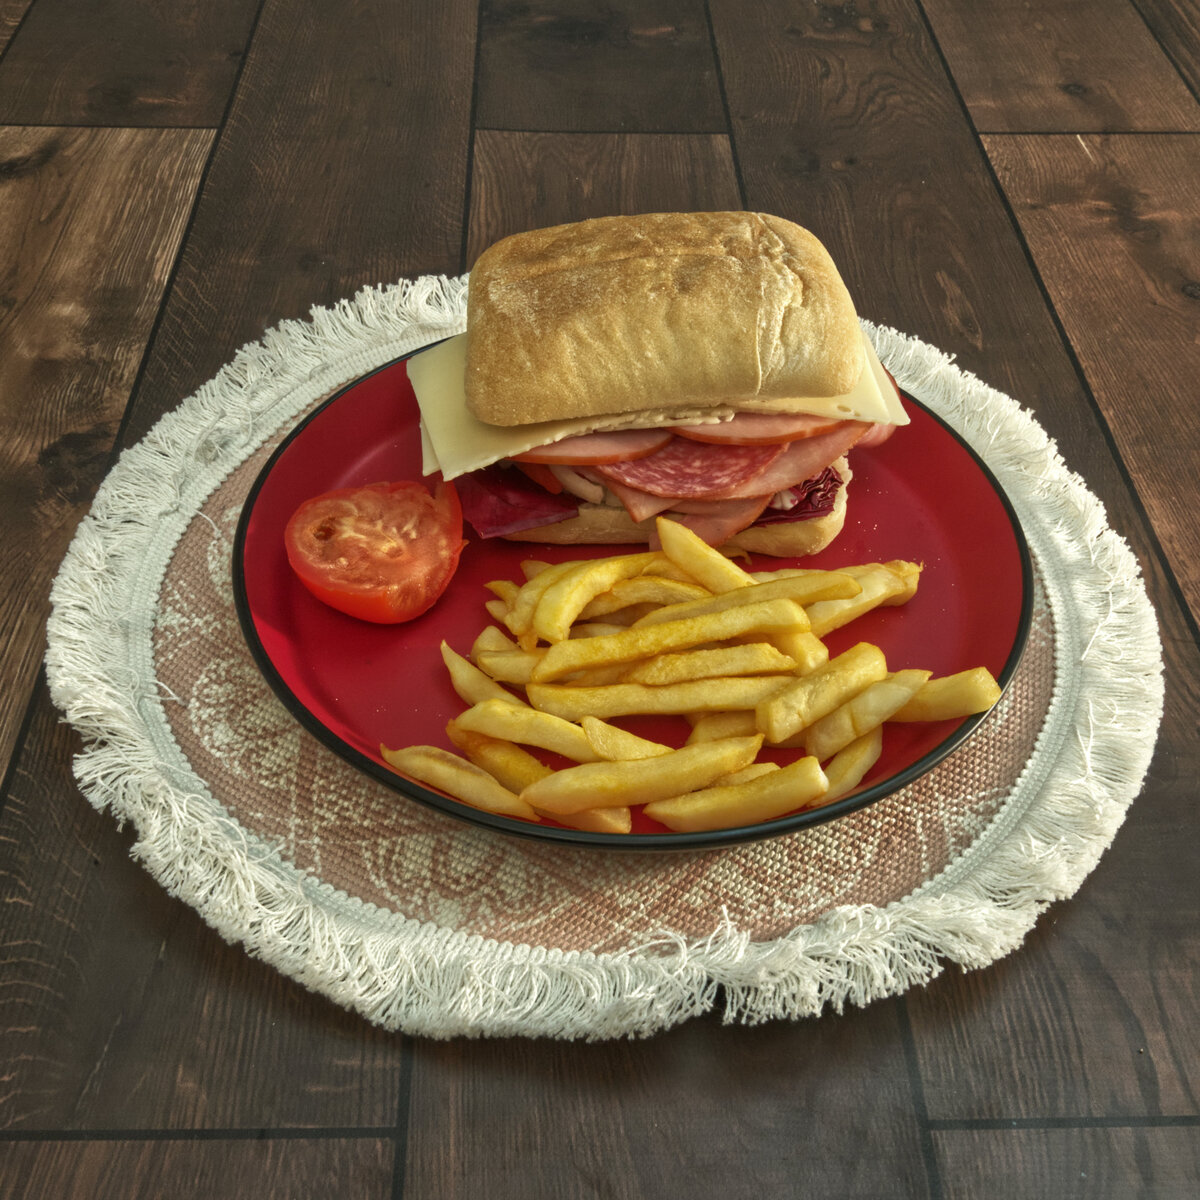 Cold Cuts Sandwich with French Fries